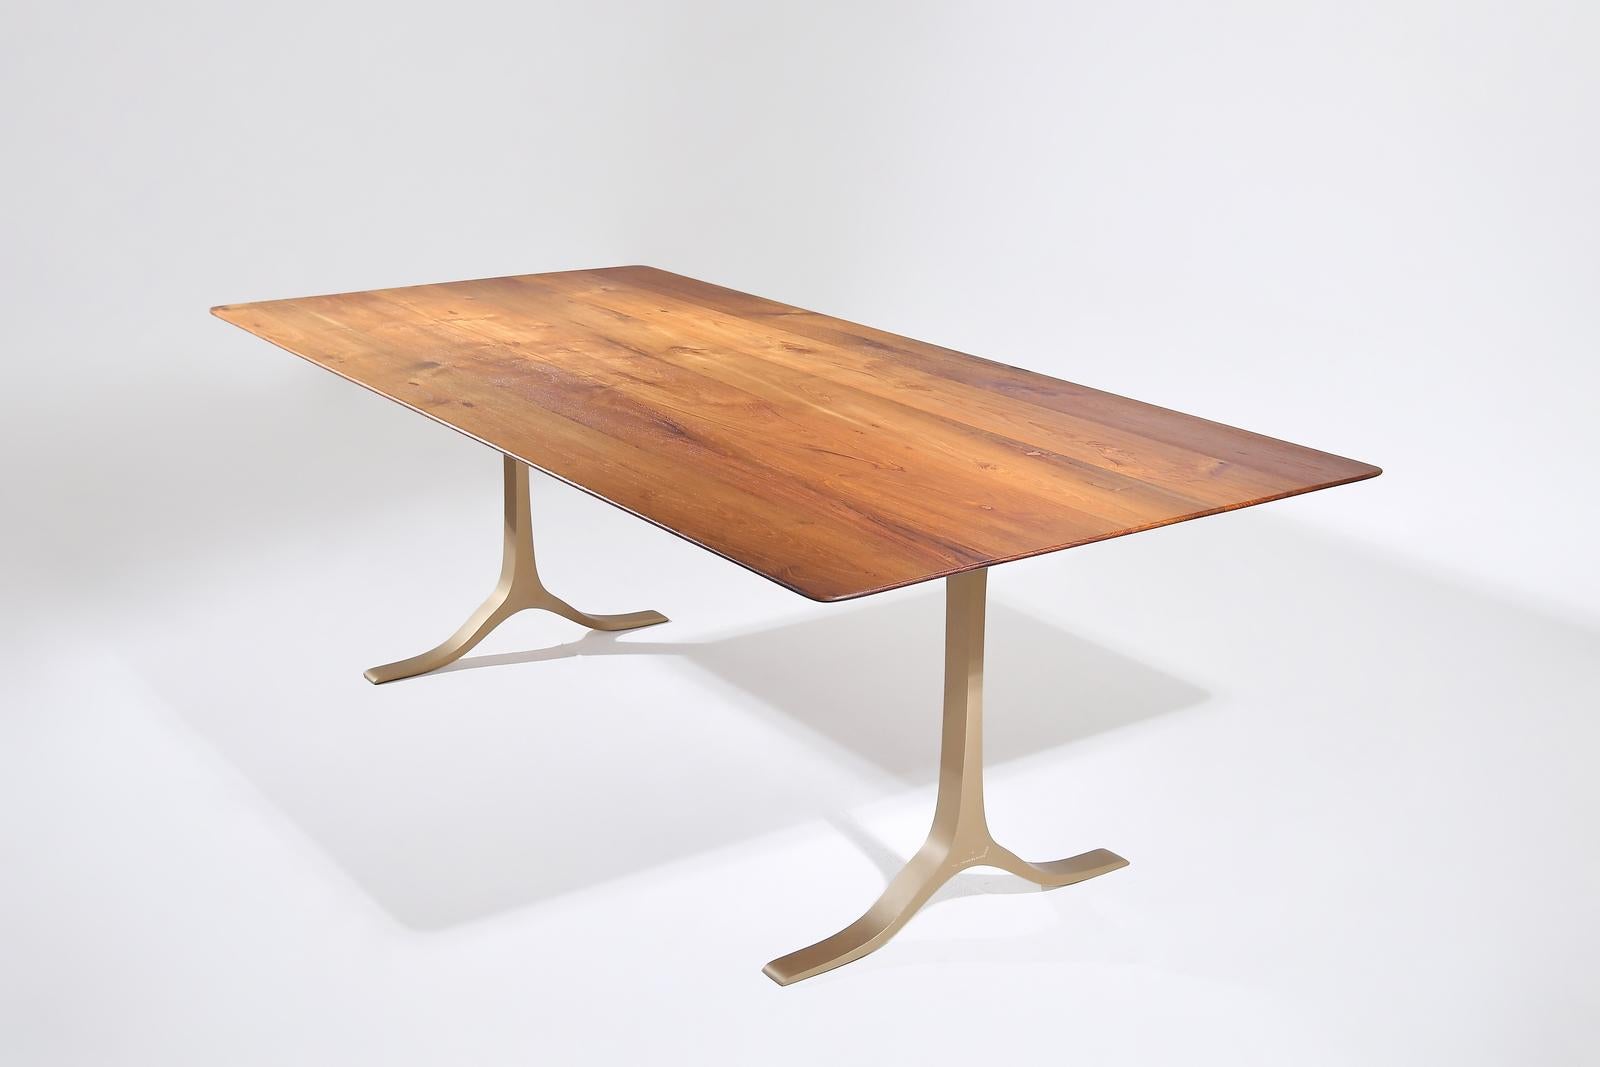 The table top was created using reclaimed Teak we recuperate from Ayutthaya, the ancient capital of Thailand. We opt for a medium width sand cast brass base which nailed the proportion to create a thin profile. The soft beveled edge is a practical